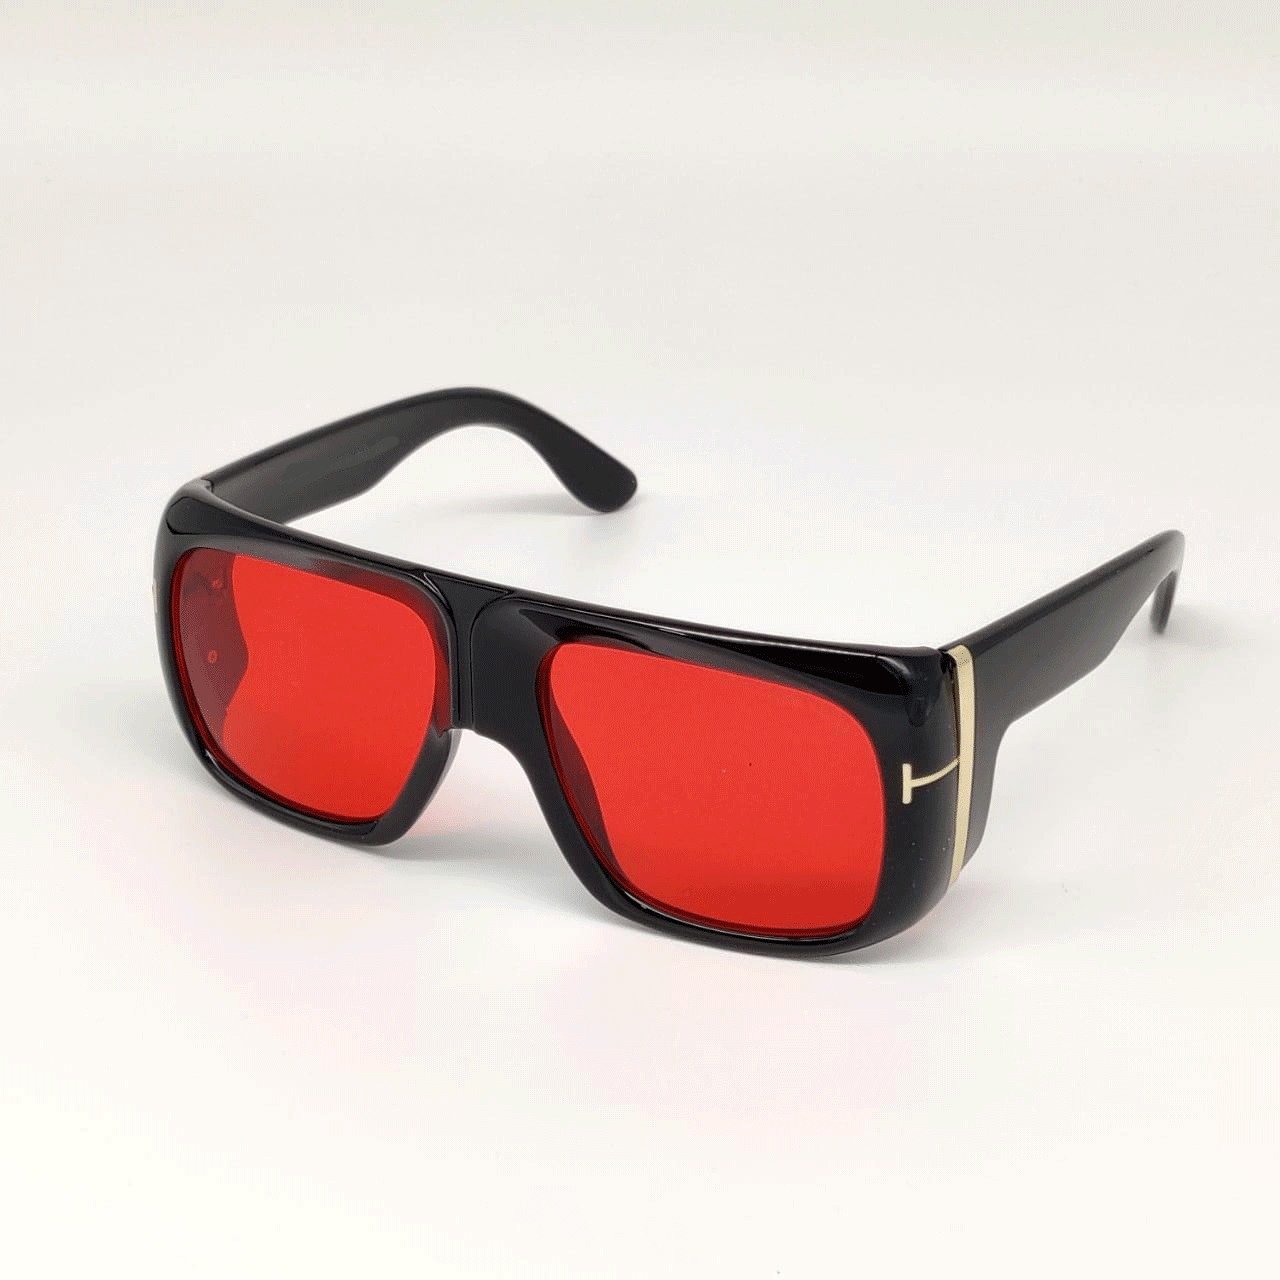 Stylish Square Vintage Candy Sunglasses For Men And Women-Unique and Classy